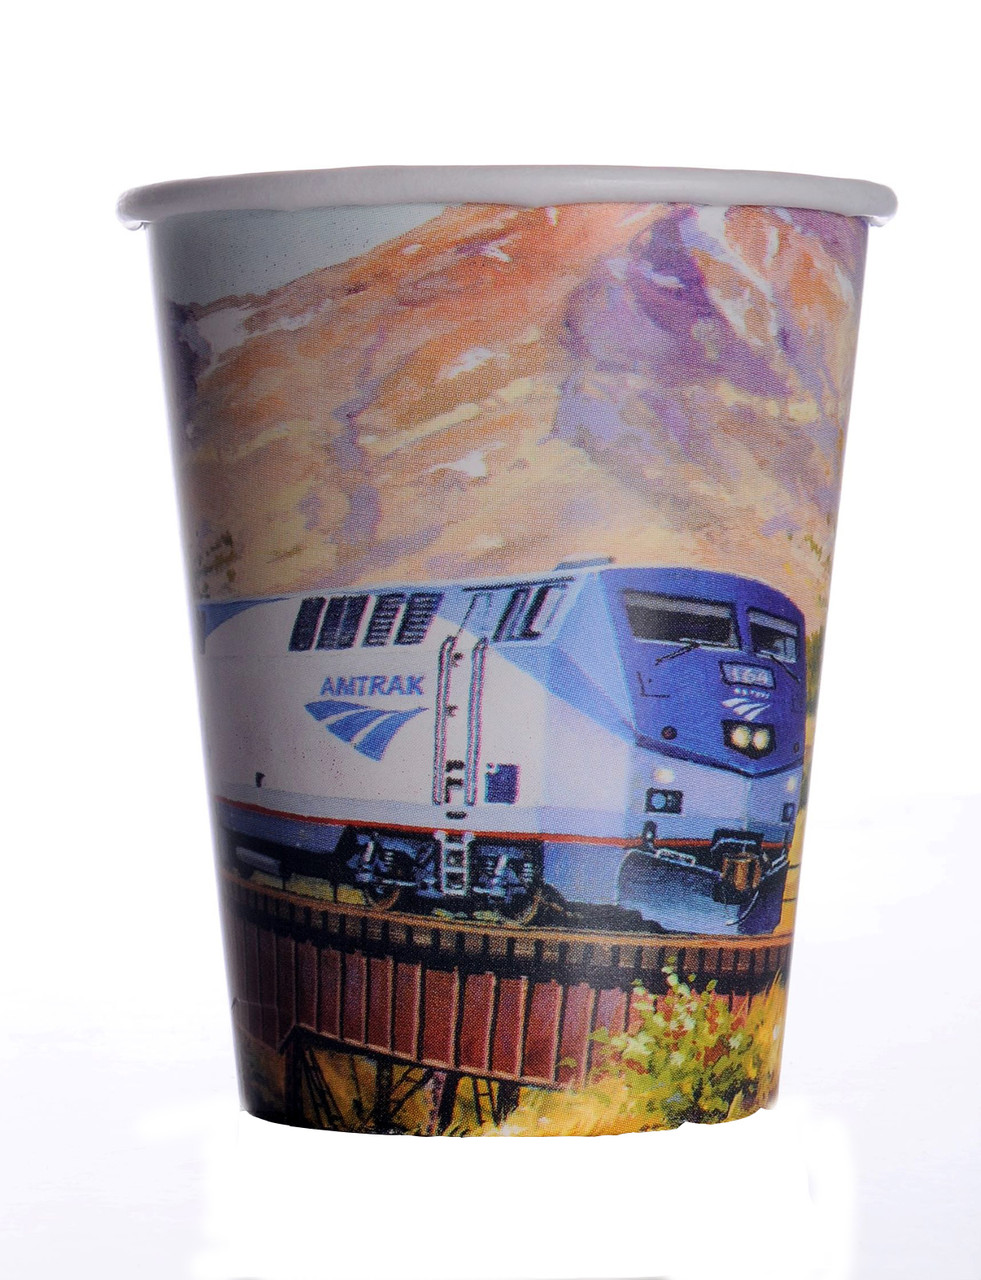 https://cdn11.bigcommerce.com/s-820a4/images/stencil/1280x1280/products/70/2353/Amtrak-Train-Party-9oz-Cups__30367.1663854606.jpg?c=2?imbypass=on